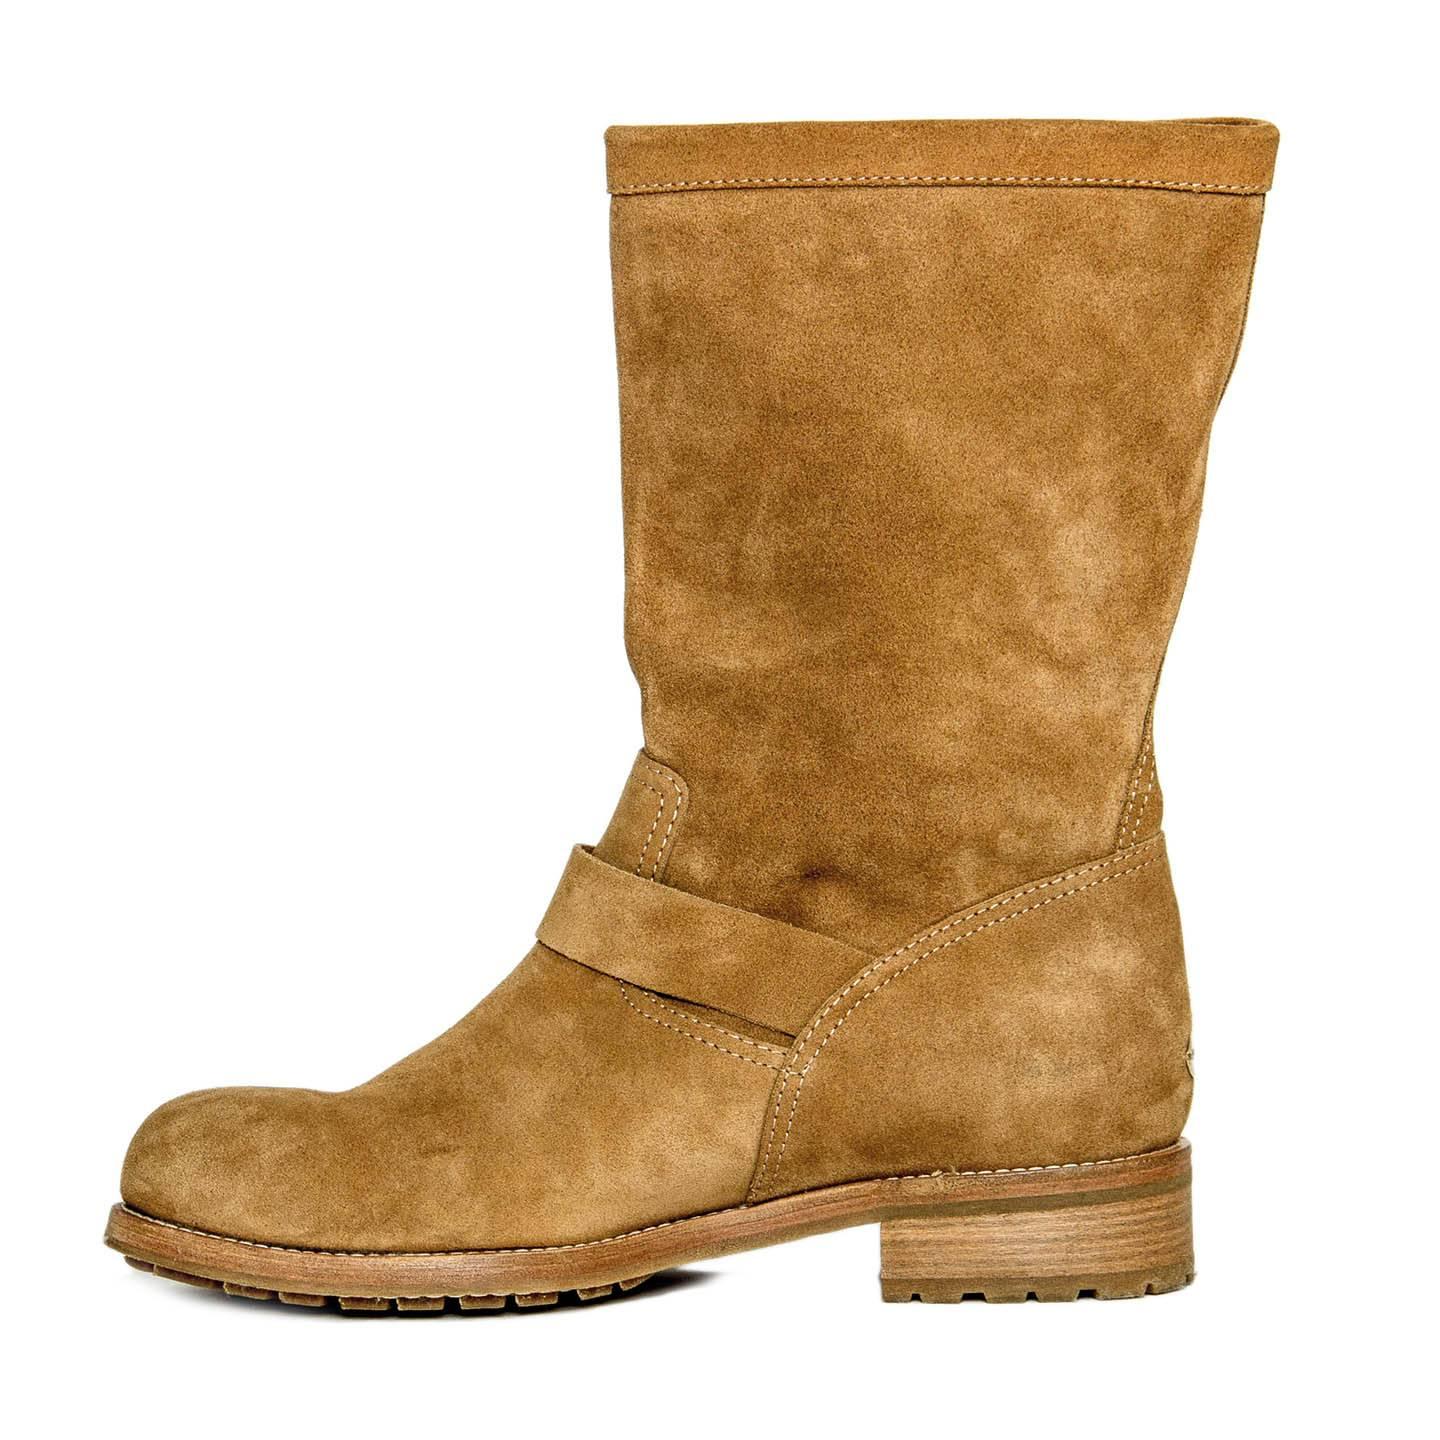 Jimmy Choo Tan Calf Height Boot In New Condition For Sale In Brooklyn, NY